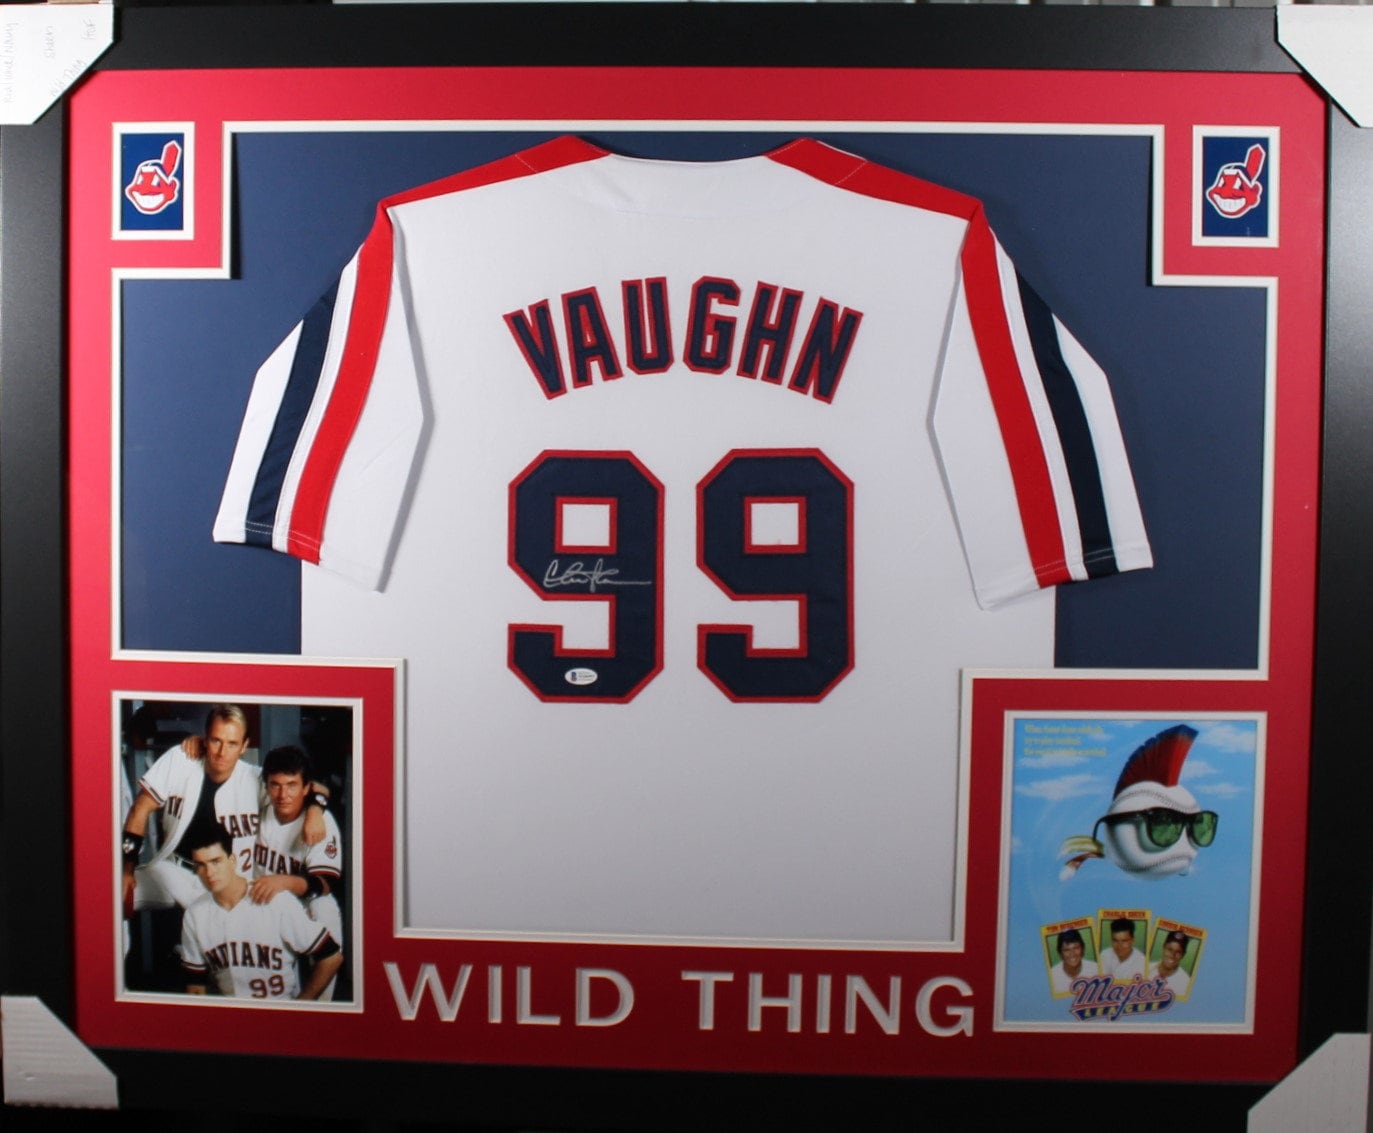 Major League Sweaters Ricky Wild Thing Vaughn (Major League) Ugly Sweater by Forever Collectibles